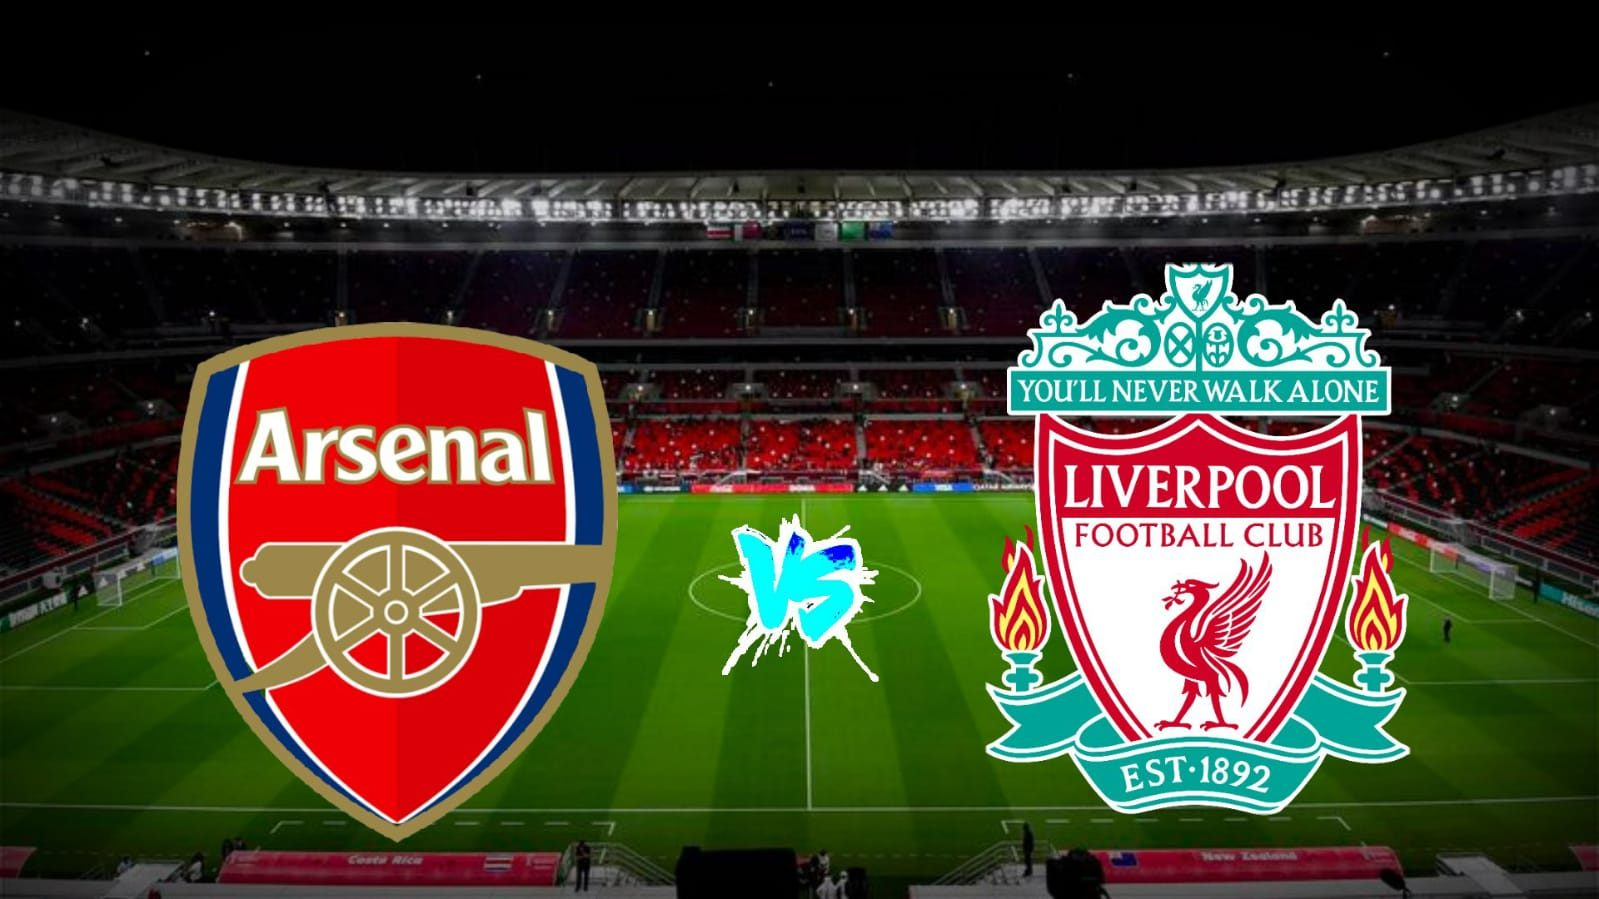 The timing of the Liverpool and Arsenal match